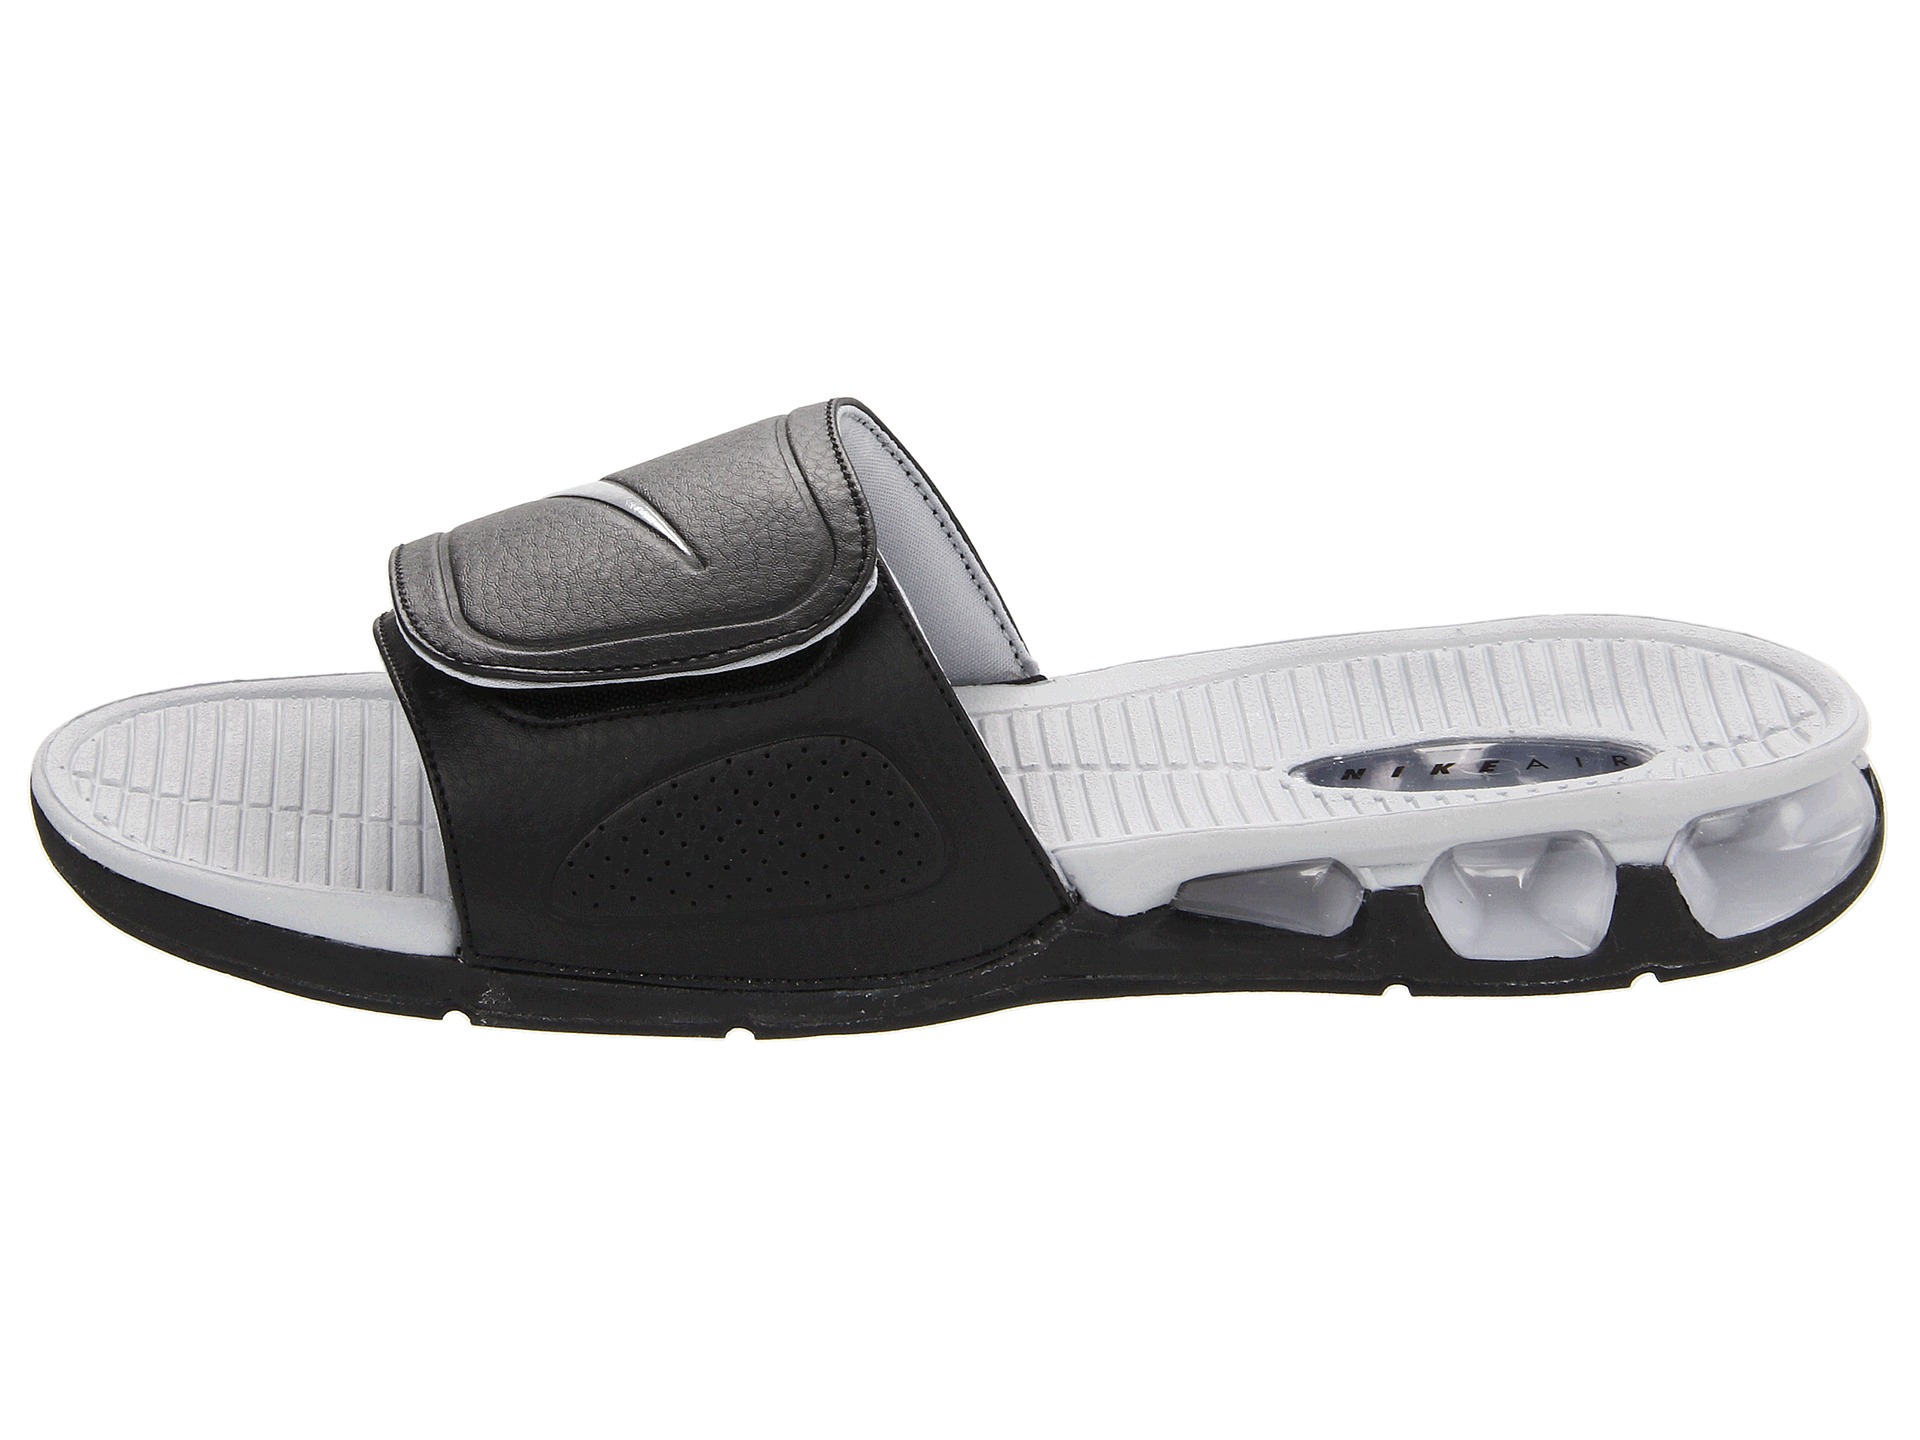 nike flip flops with air bubble